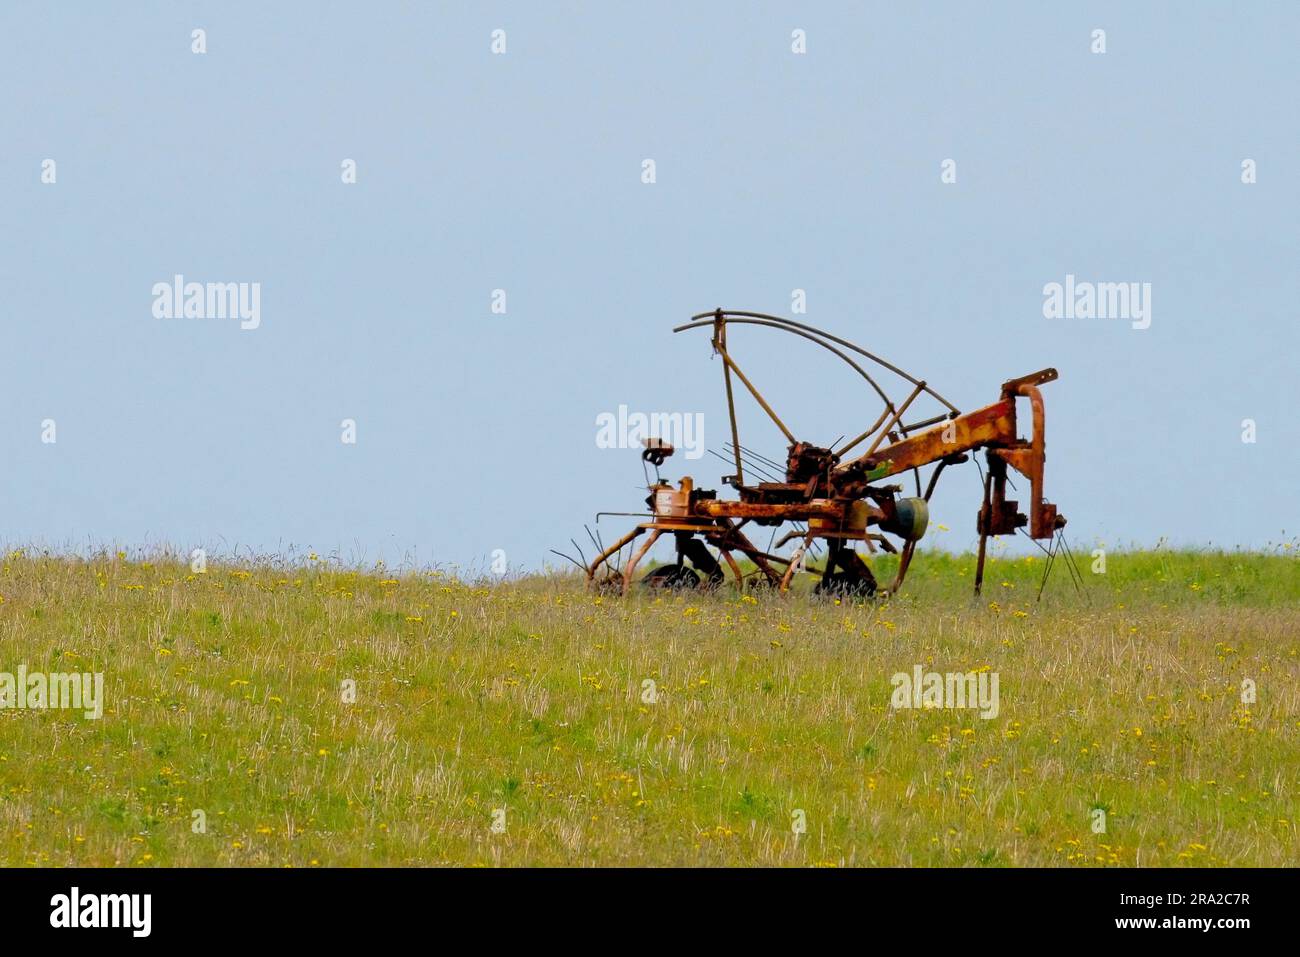 Old and abandoned Farm machinery on the Machair. Machair is a Gaelic word meaning fertile low lying grassy plain. Stock Photo